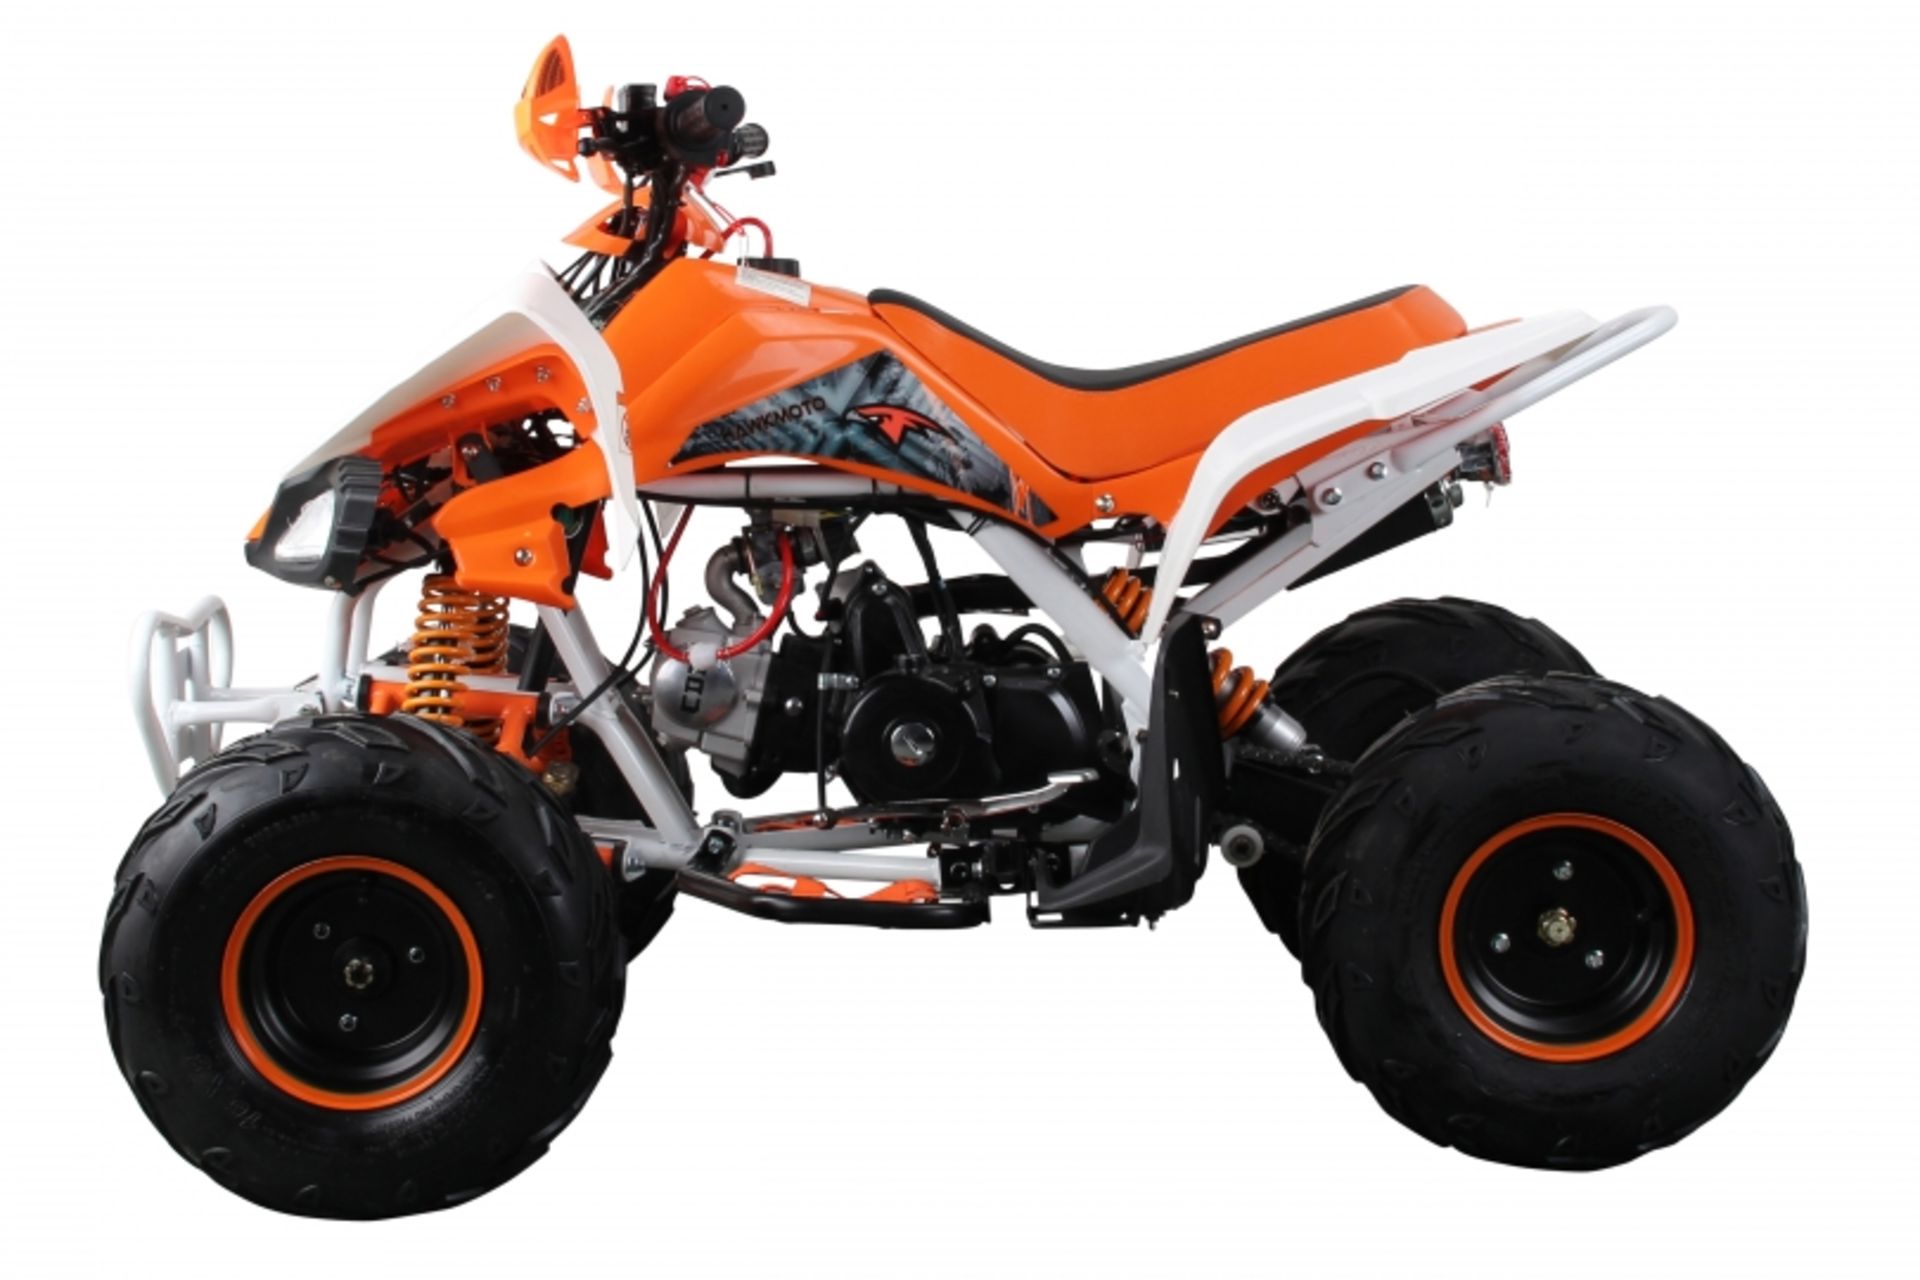 V Brand New 125cc Interceptor SV2 4 Stroke Quad Bike With Reverse Gear - Double Front Suspension/ - Image 2 of 7